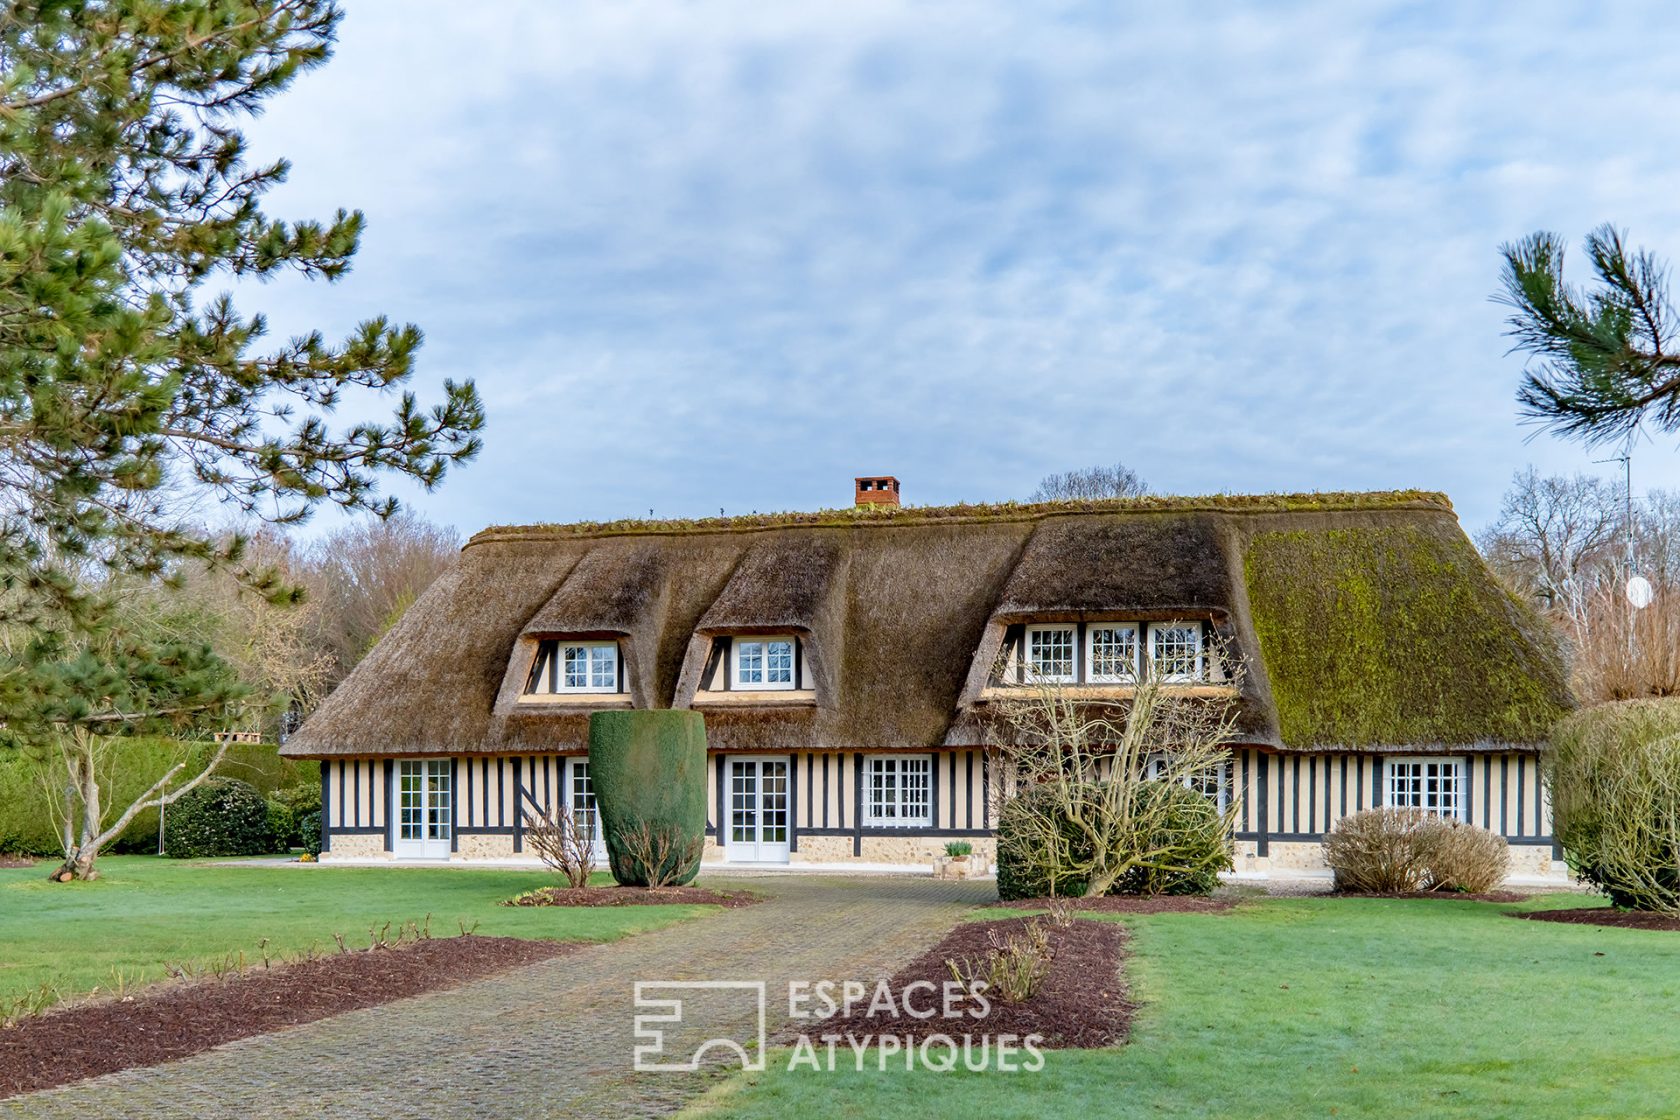 Luxury thatched cottage in its park